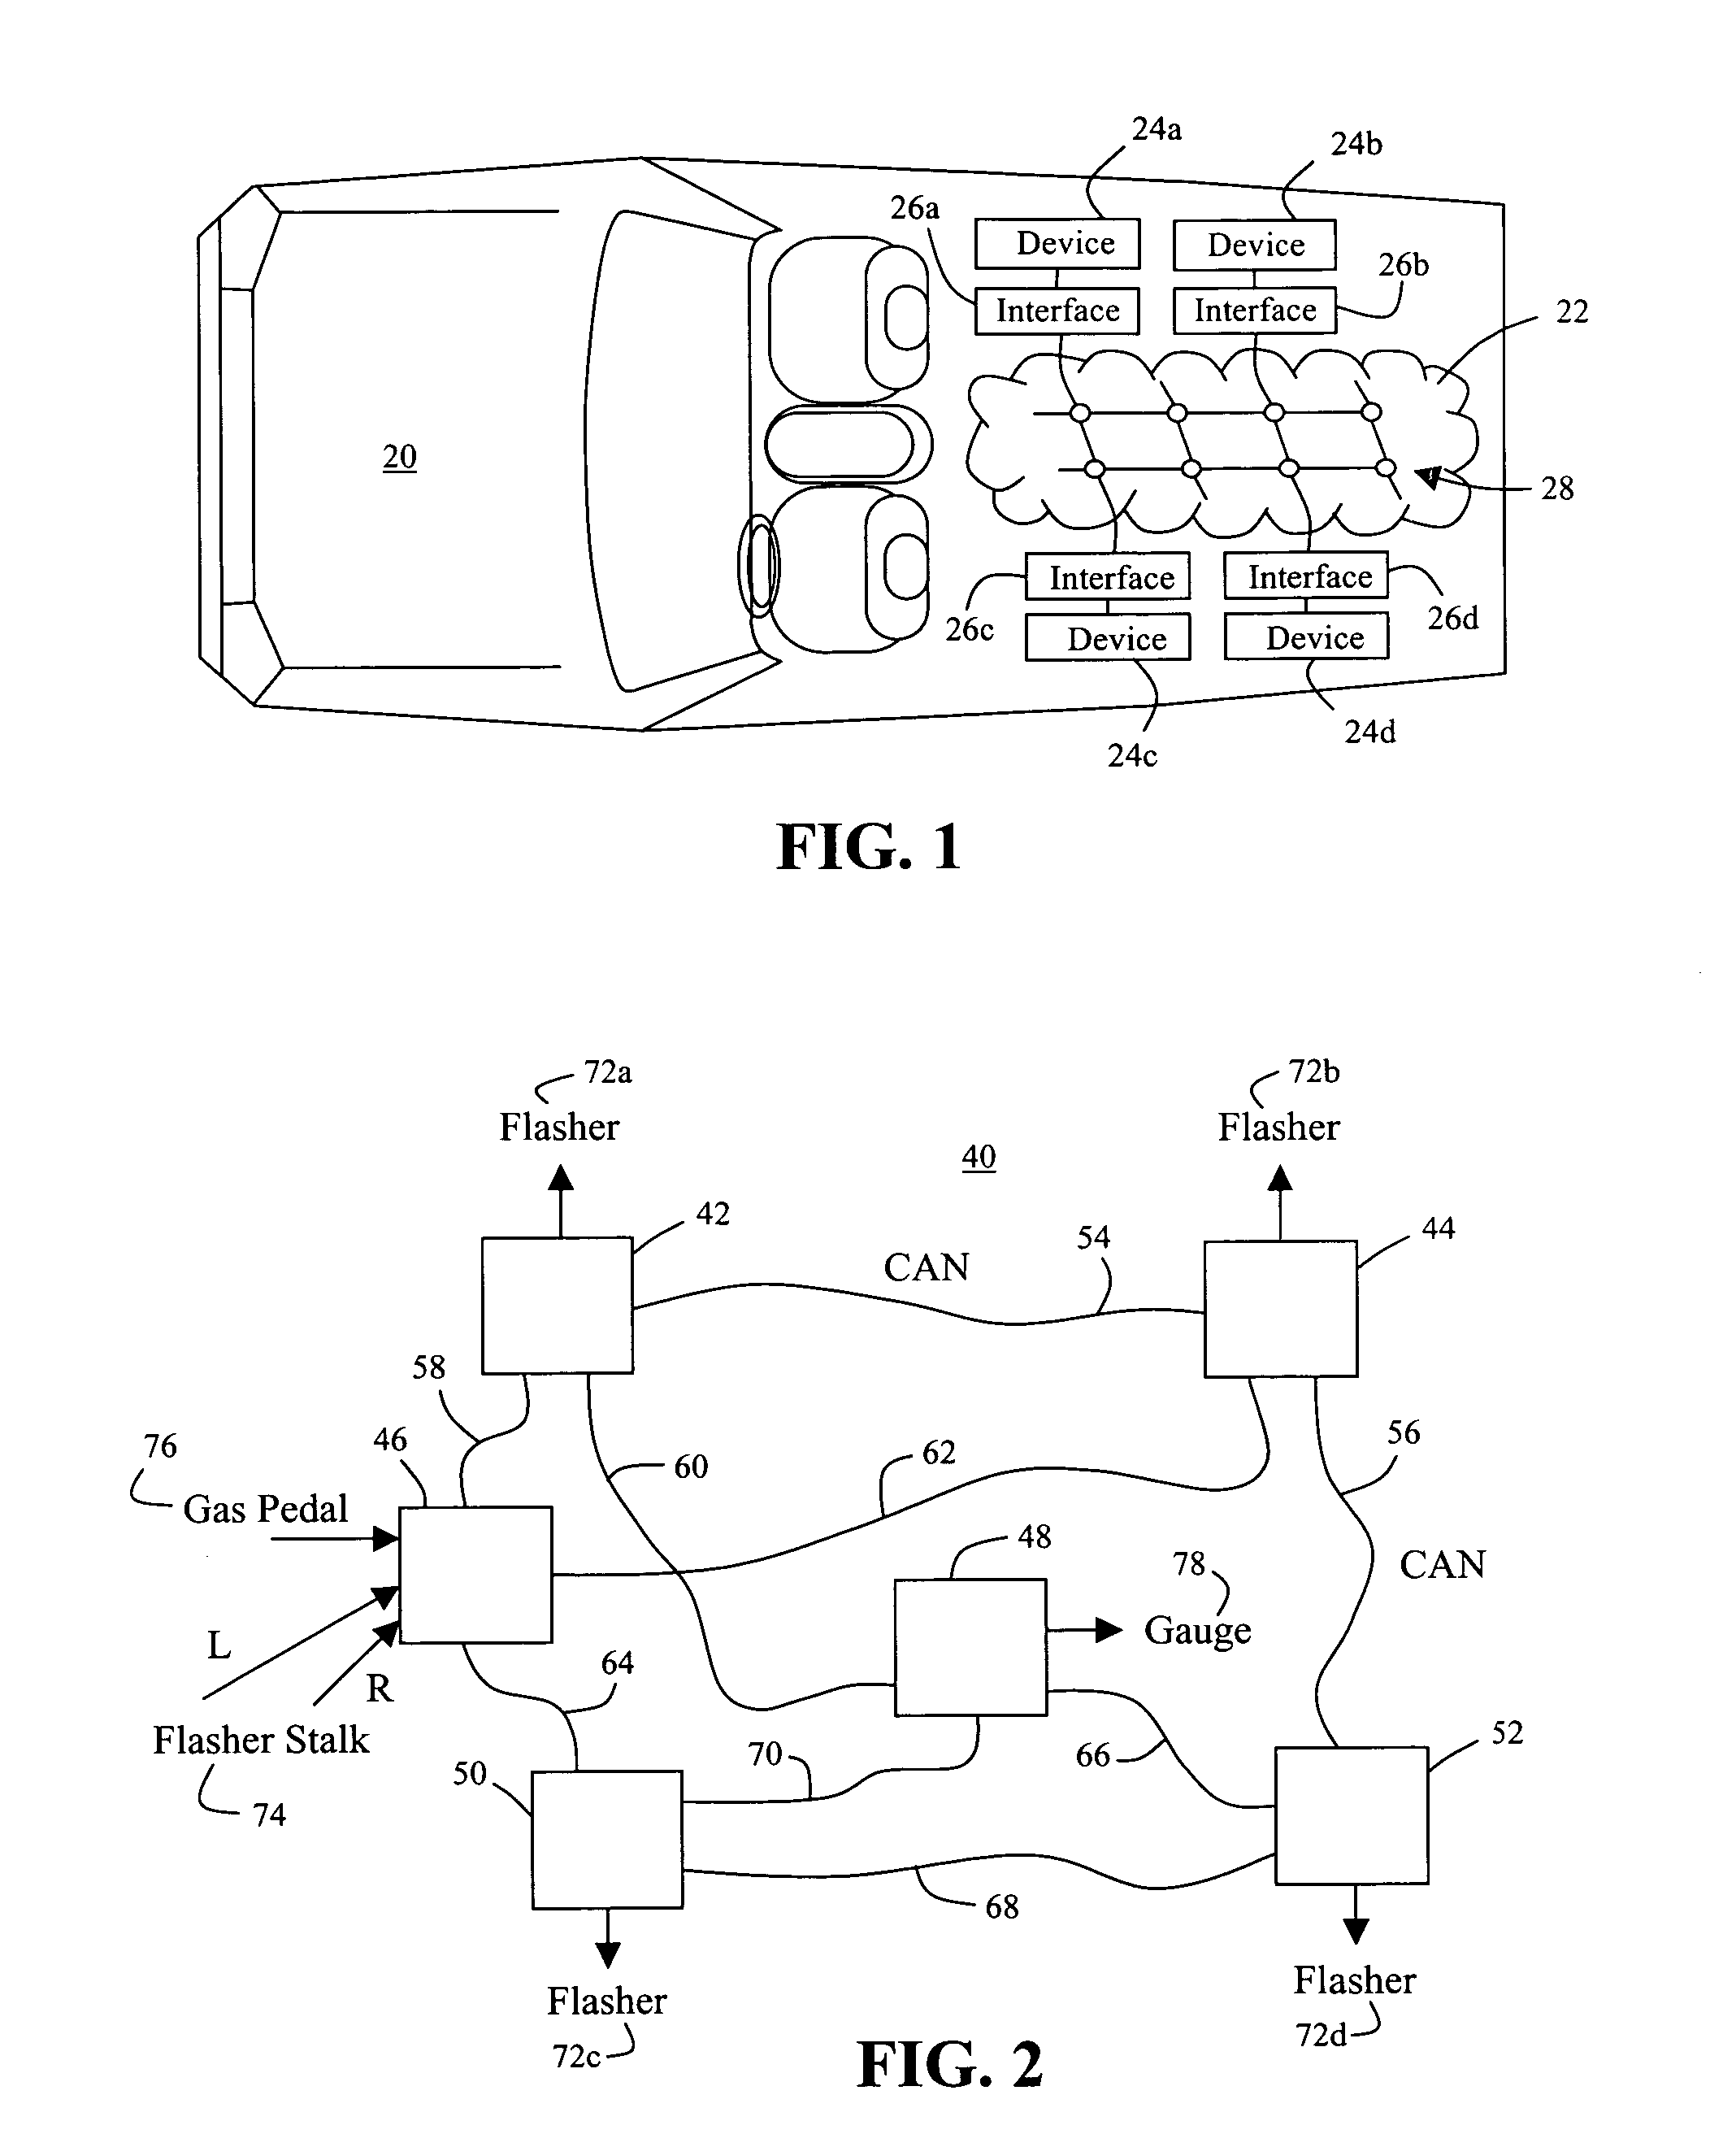 Vehicle network with time slotted access and method